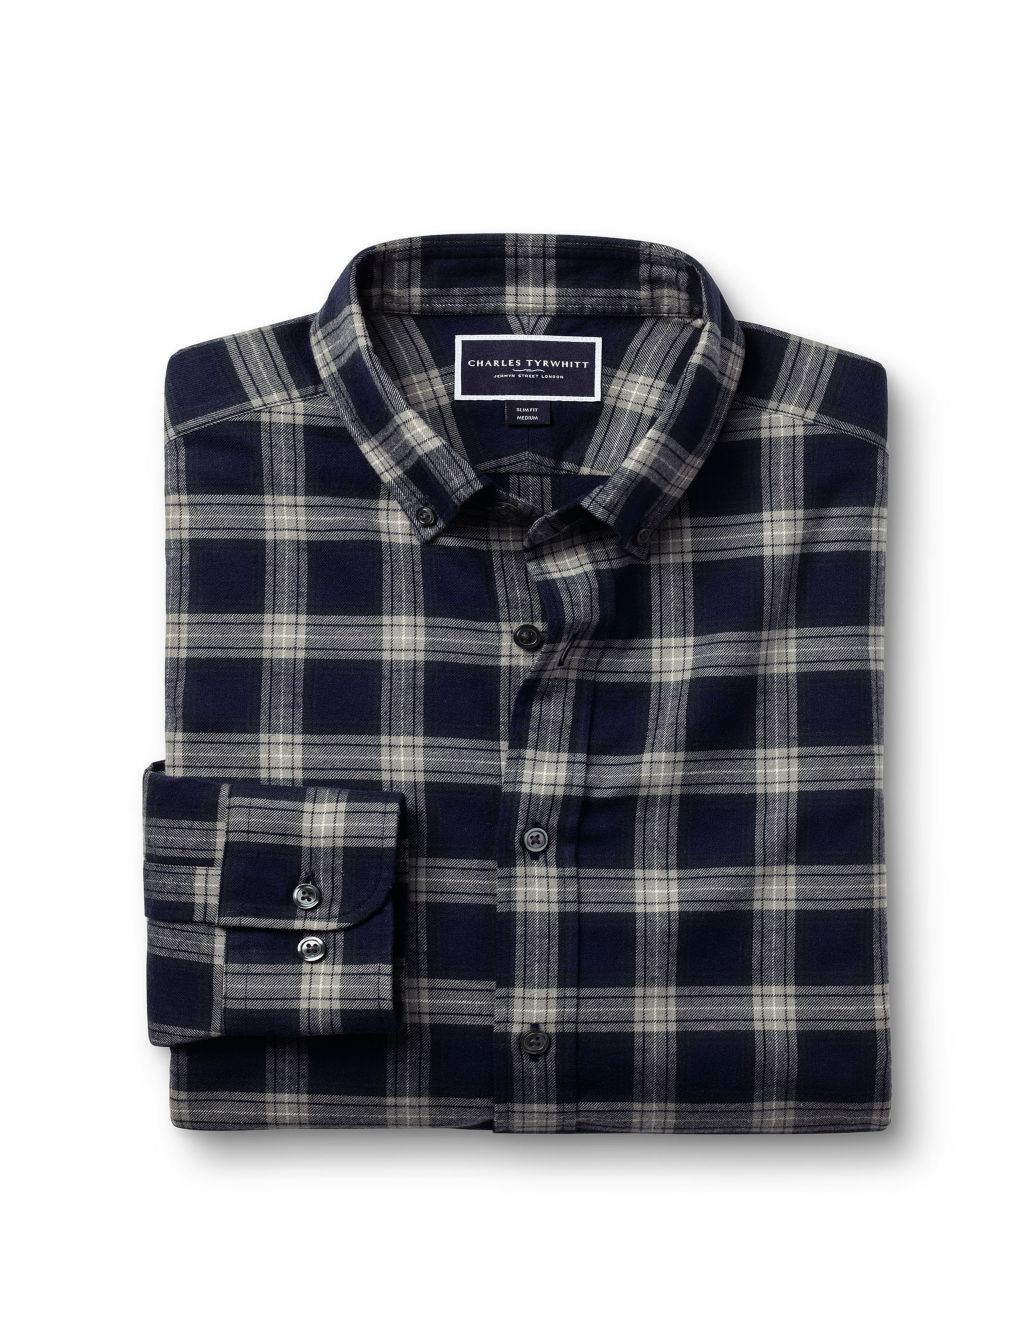 Slim Fit Brushed Cotton Check Flannel Shirt image 2